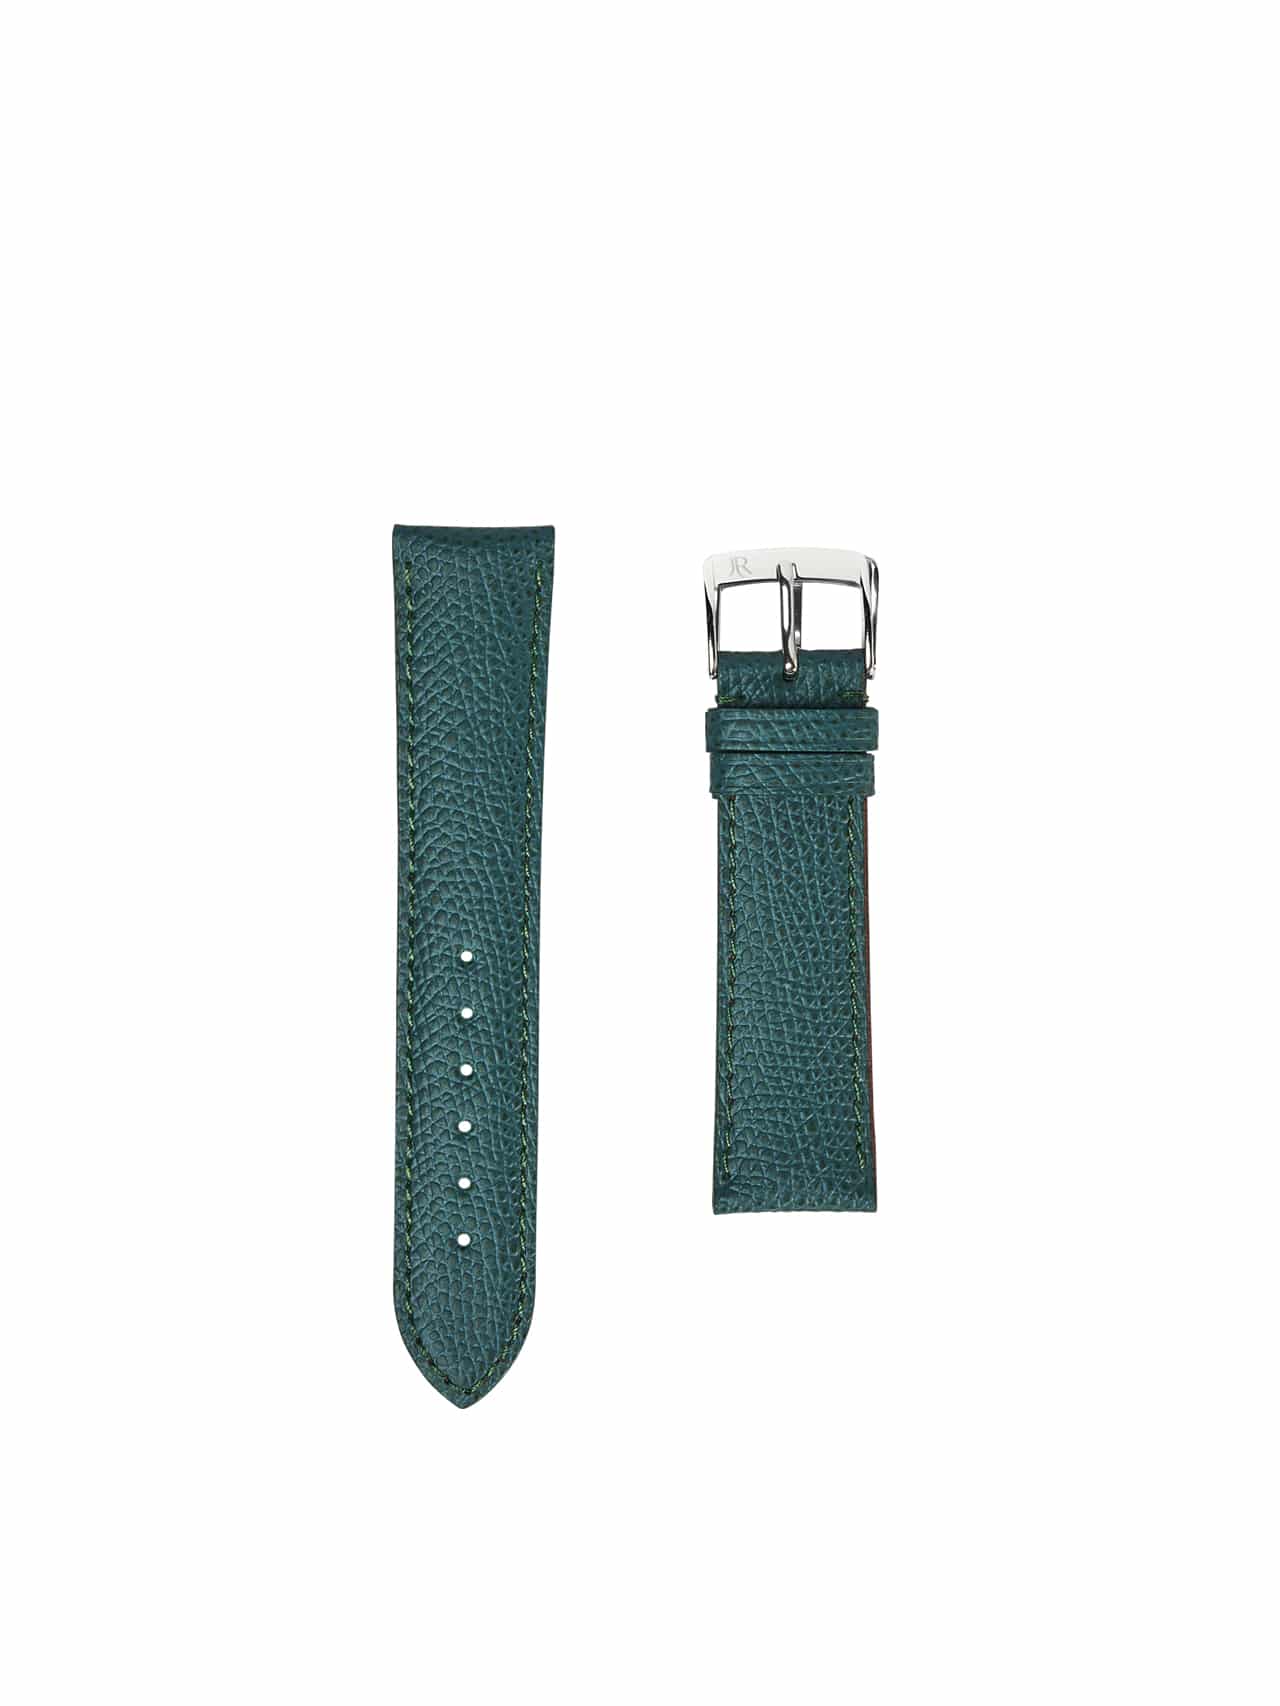 jean rousseau leather strap green brown